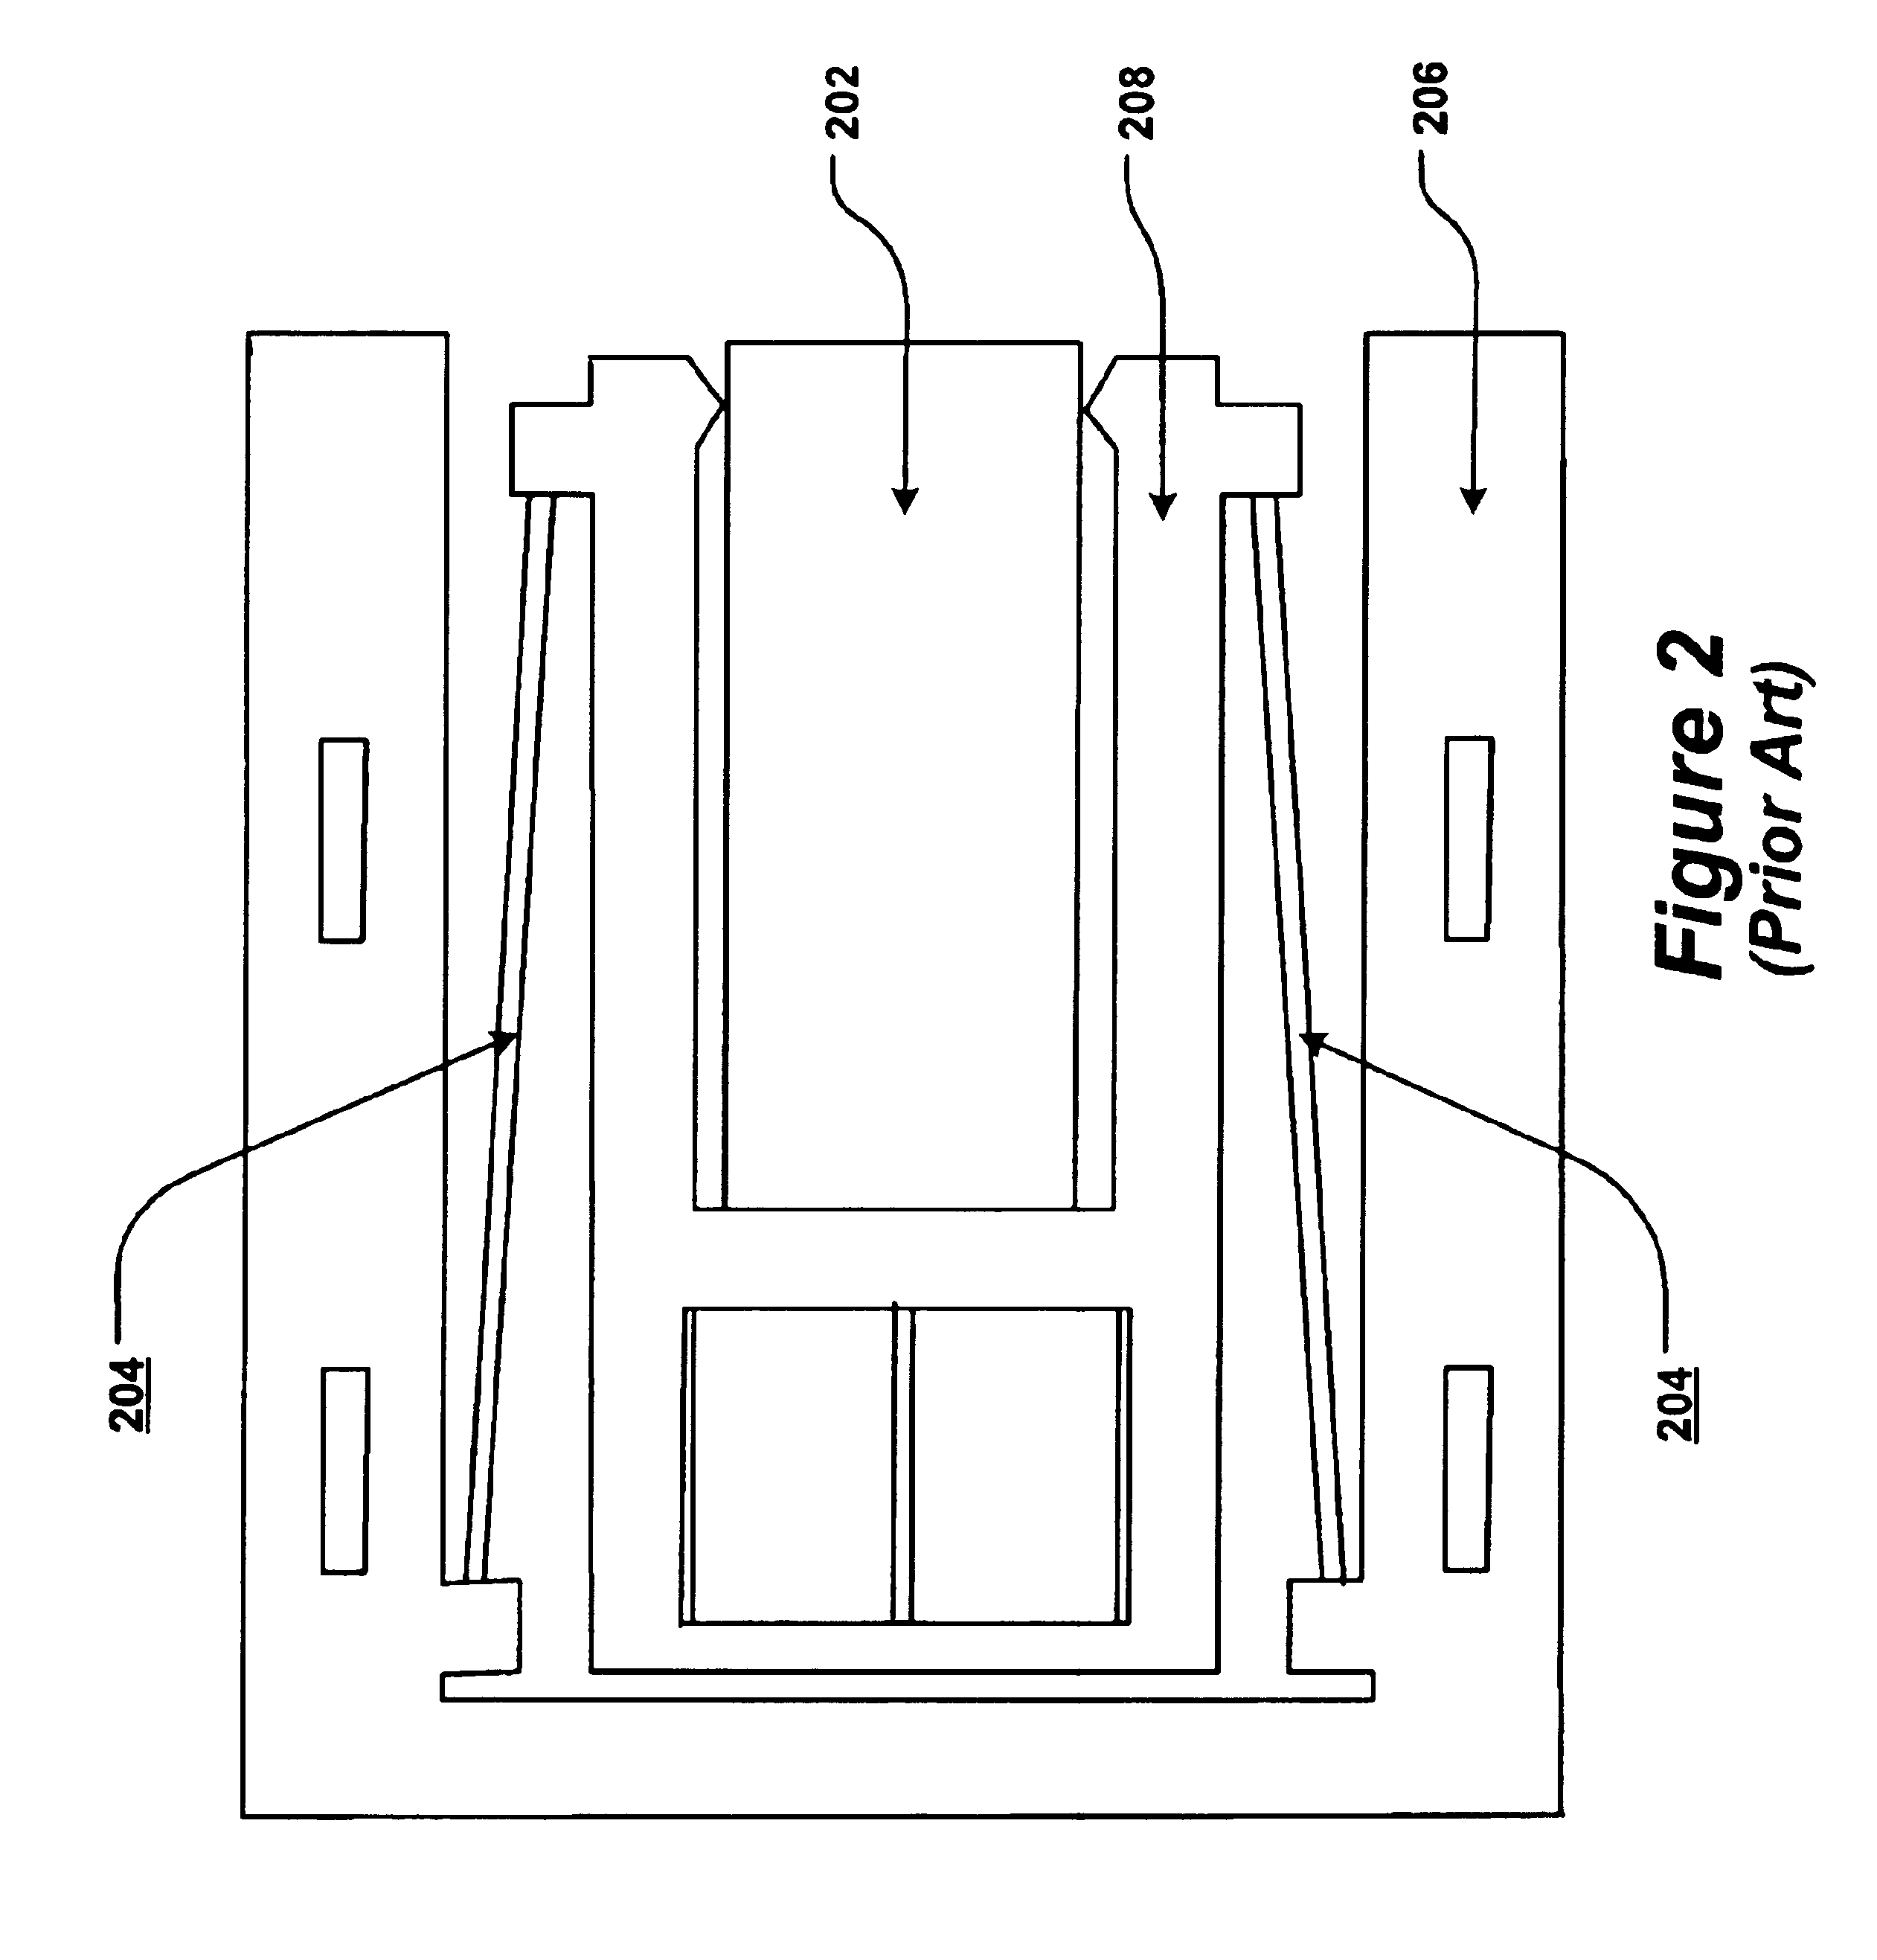 Integrated method and device for a dual stage micro-actuator and suspension design for the hard disk driver